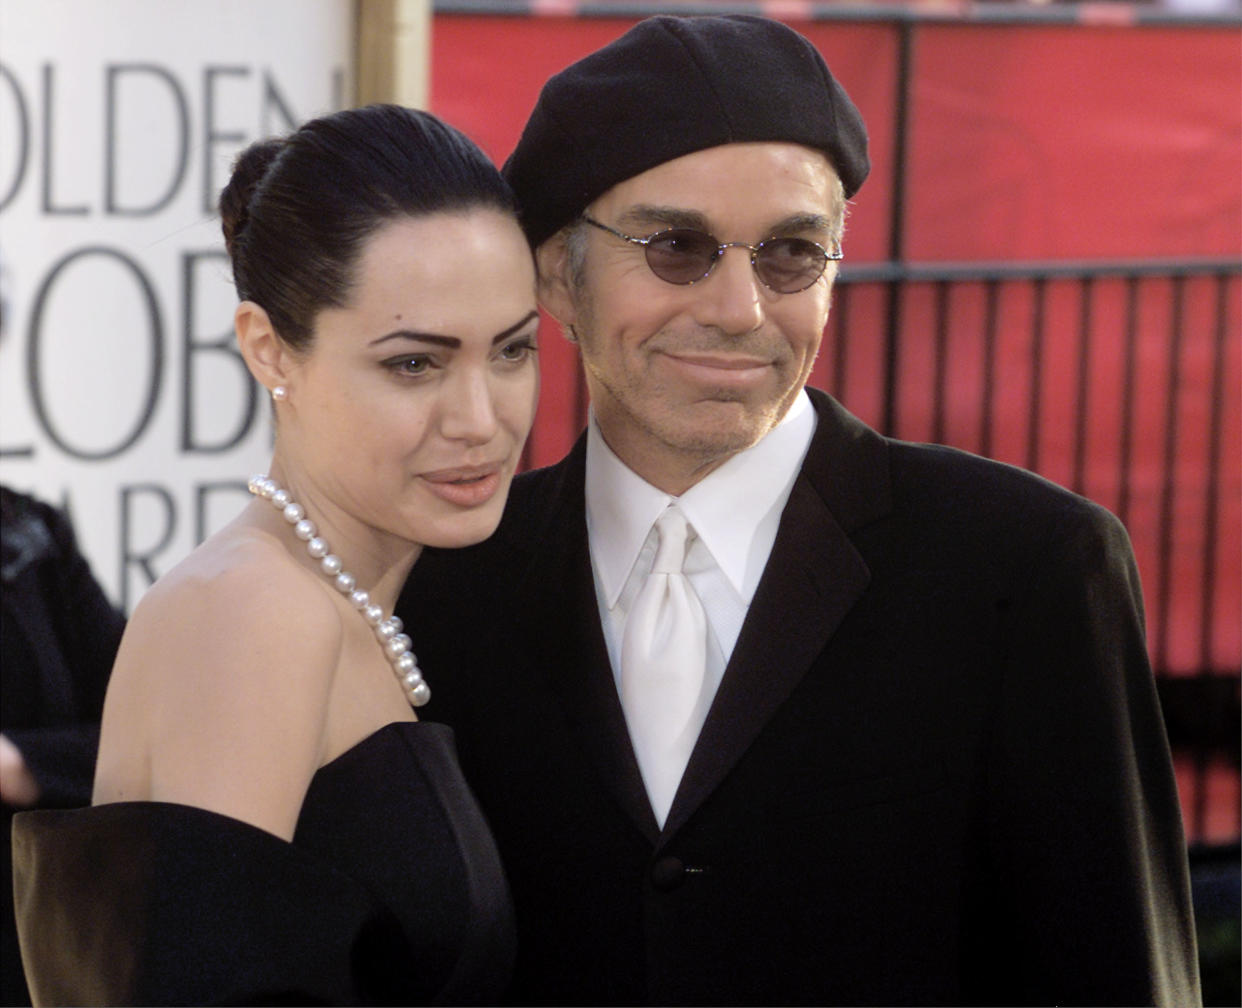 Billy Bob Thornton (R) and actress wife Angelina Jolie pose during  arrivals at the 59th annual Golden Globe Awards in Beverly Hills,  January 20, 2002. Thornton is nominated for Best Actor in a Motion  Picture - Drama, and Comedy or Musical categories. REUTERS/Fred  Prouser    JH/SV